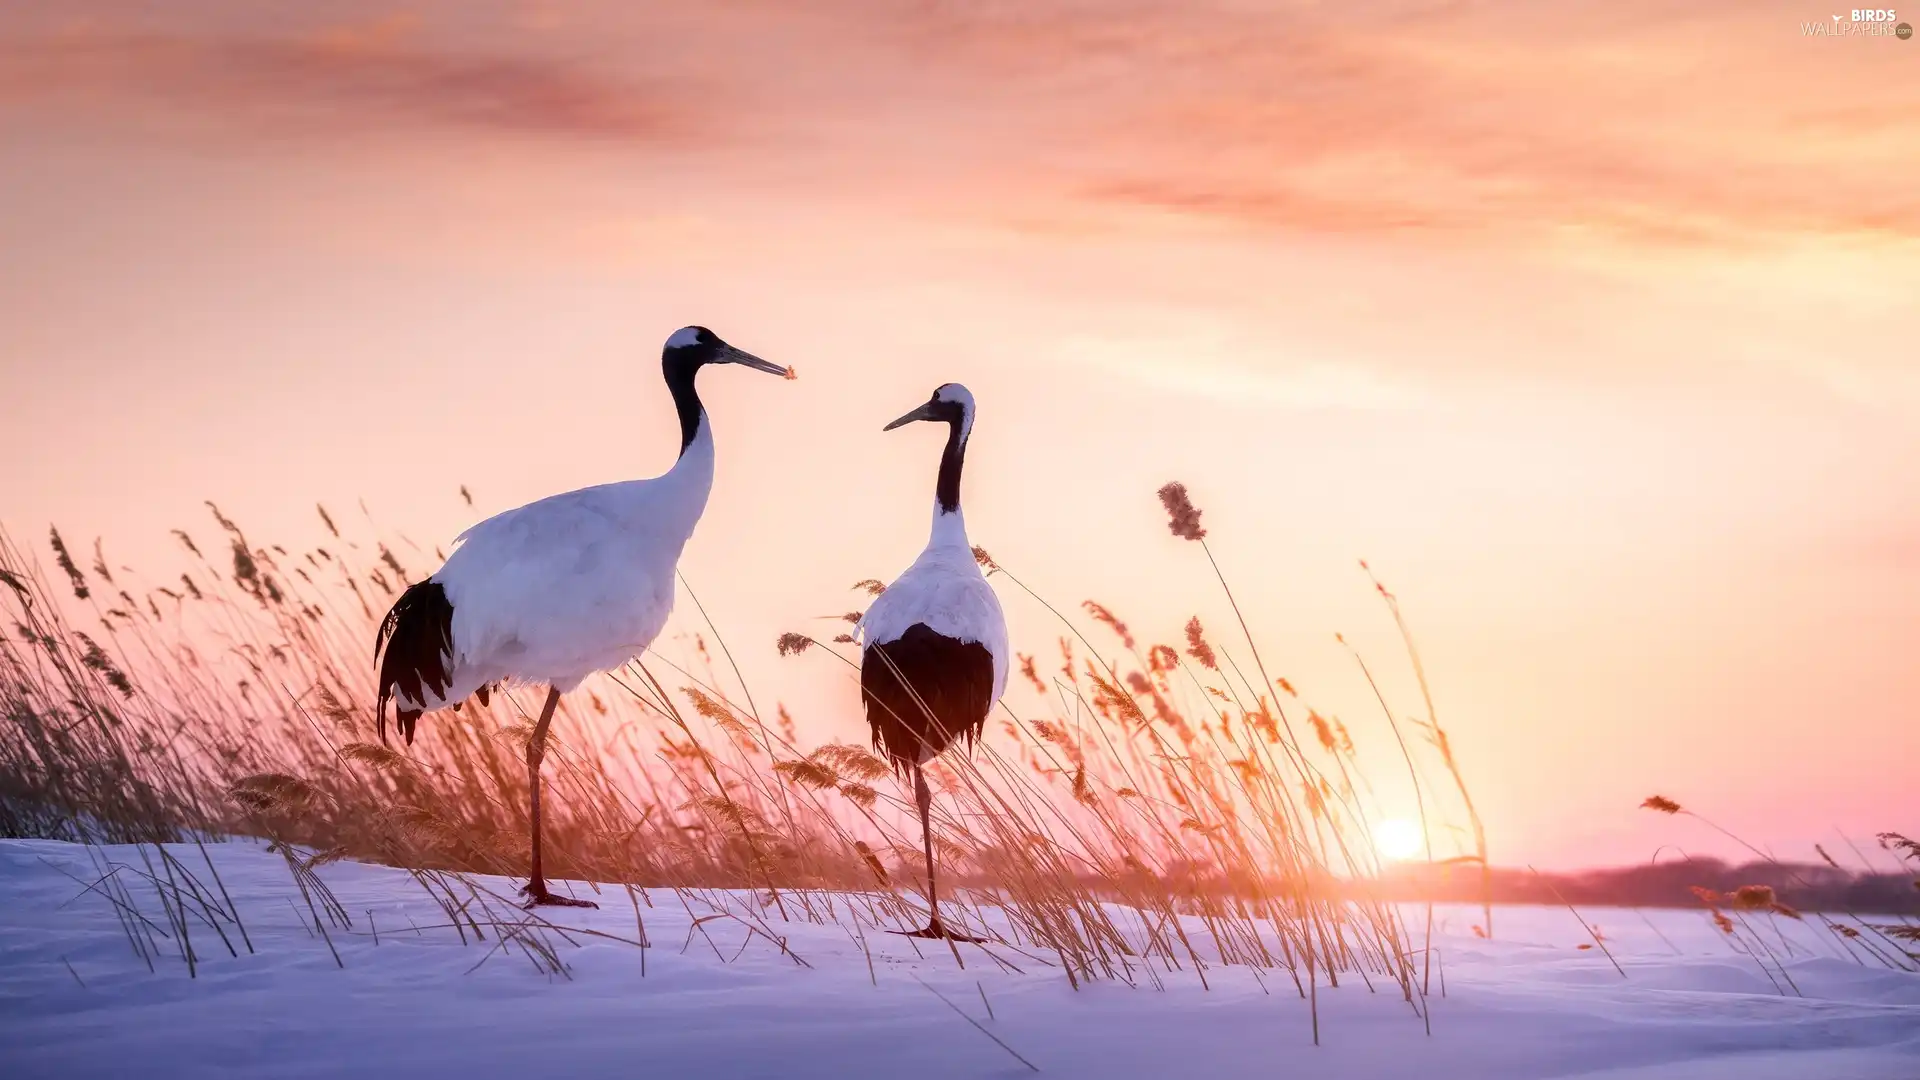 Manchurian Cranes, Two cars, snow, Cane, Great Sunsets, birds